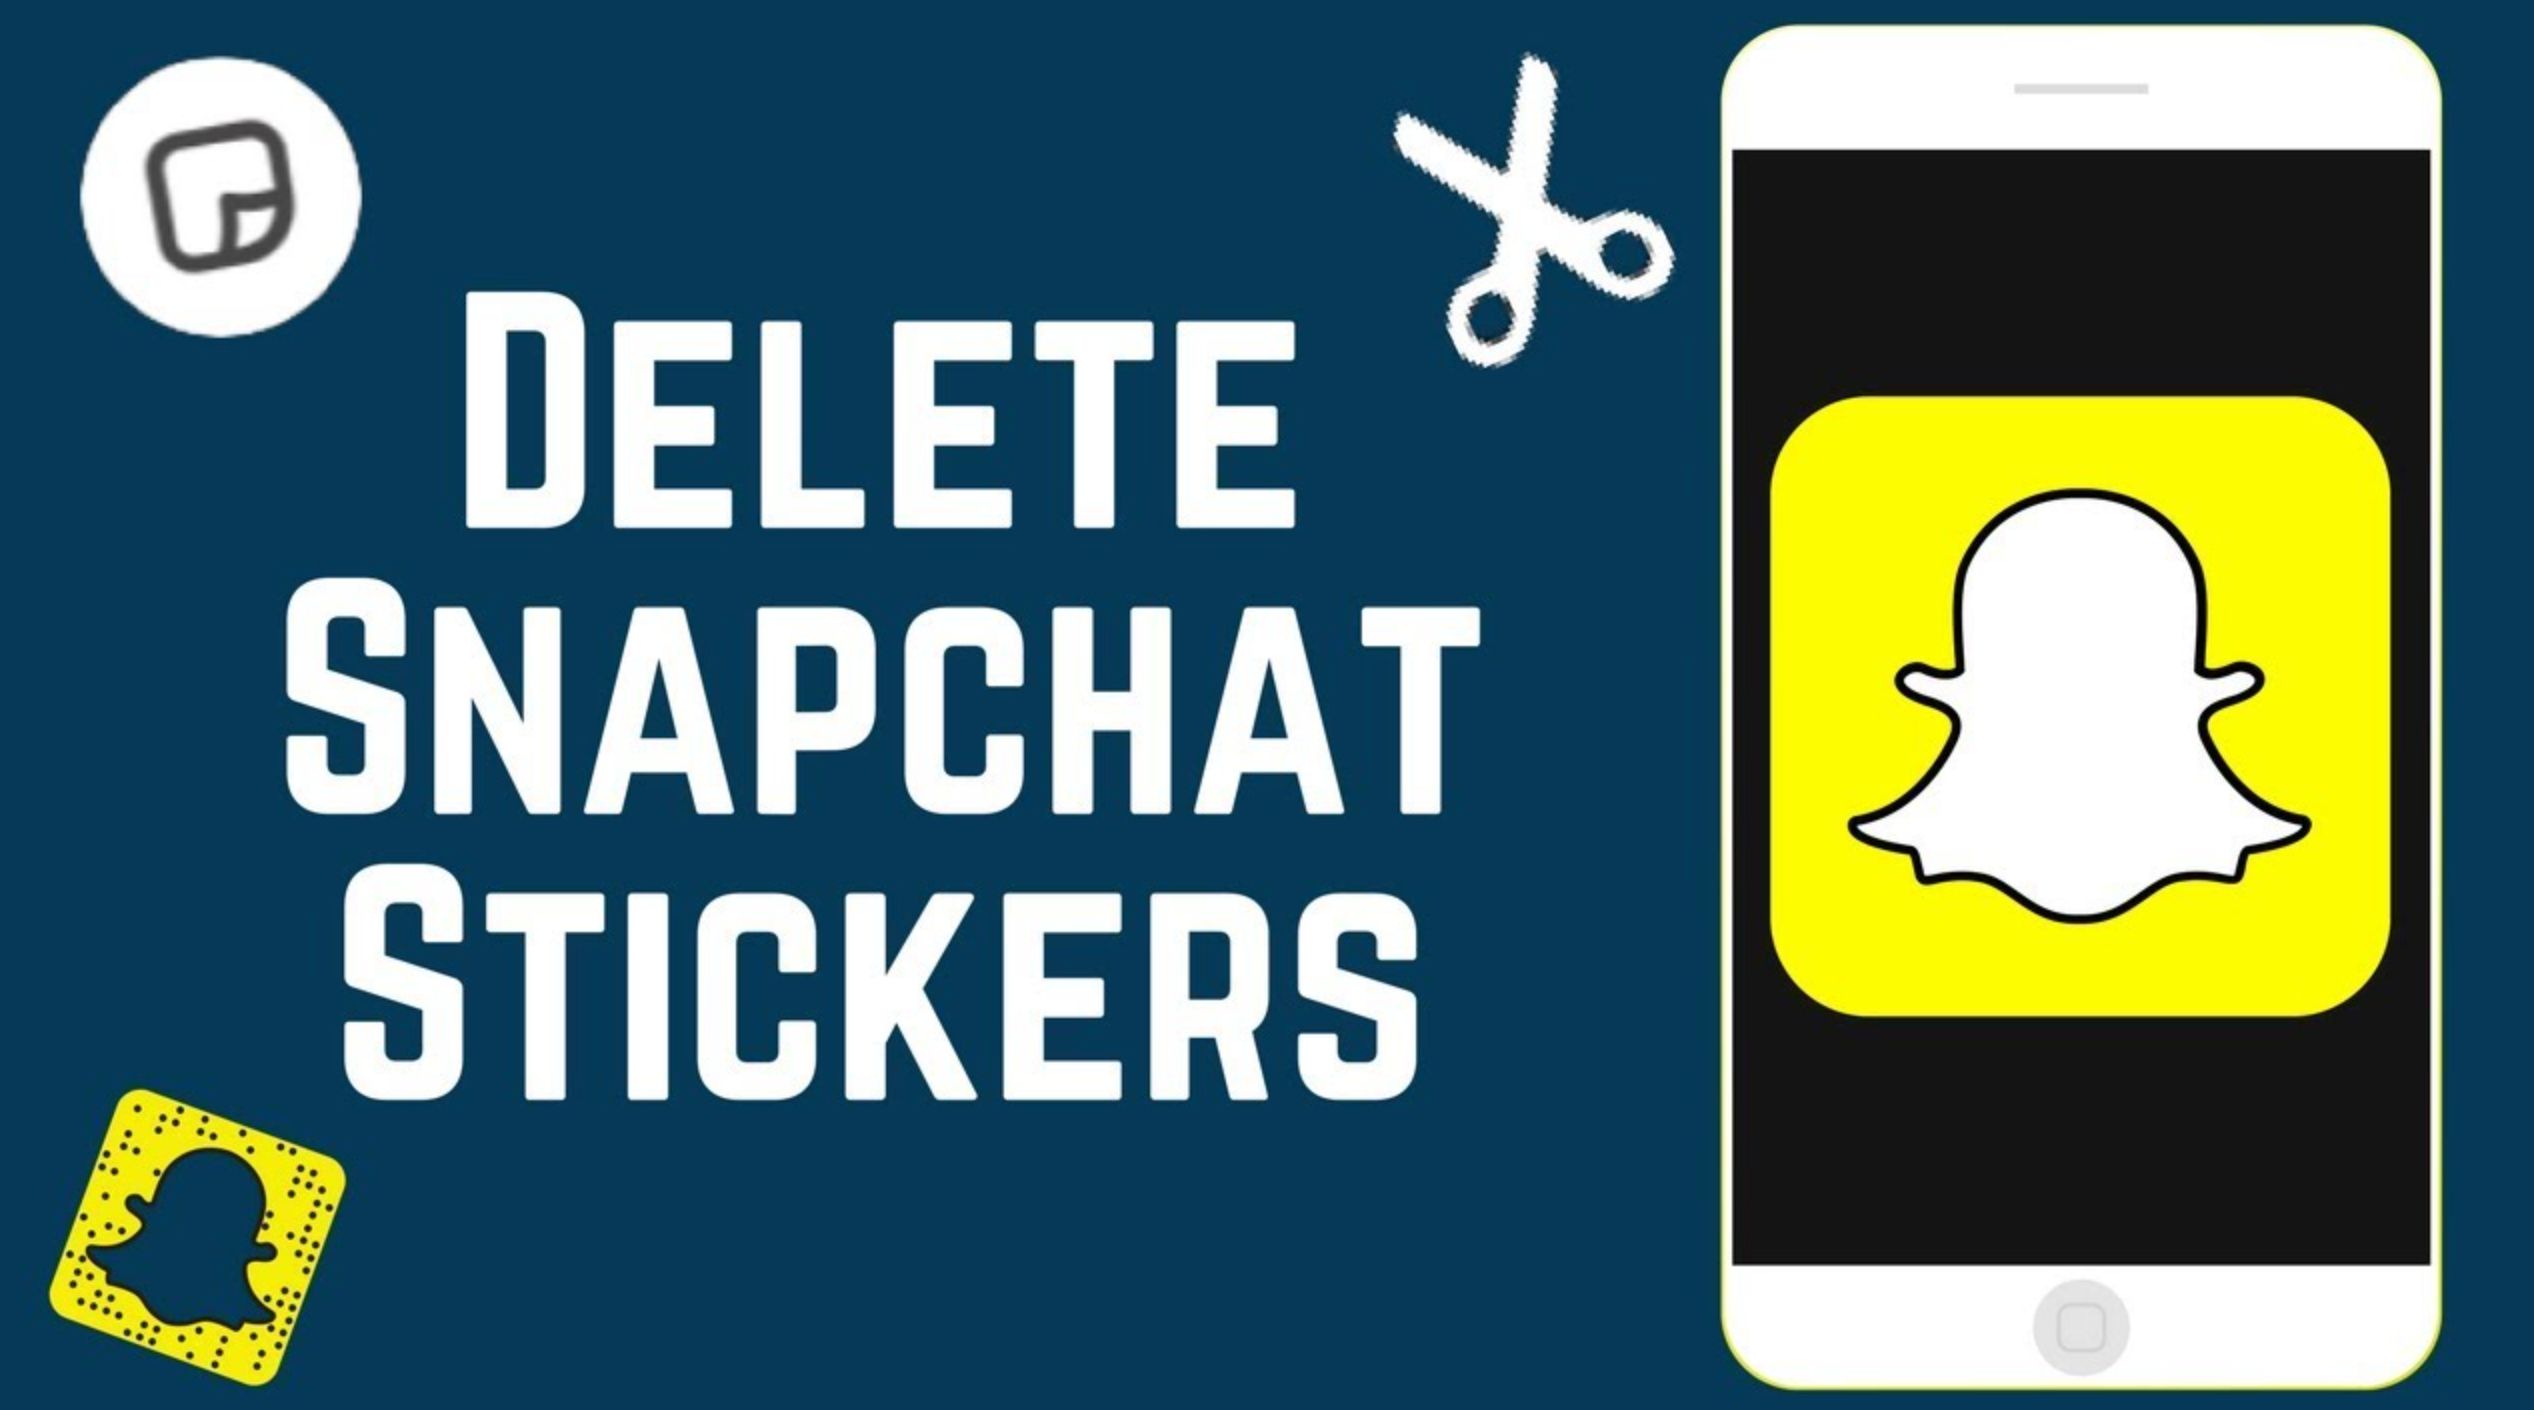 How To Delete Stickers In The Snapchat